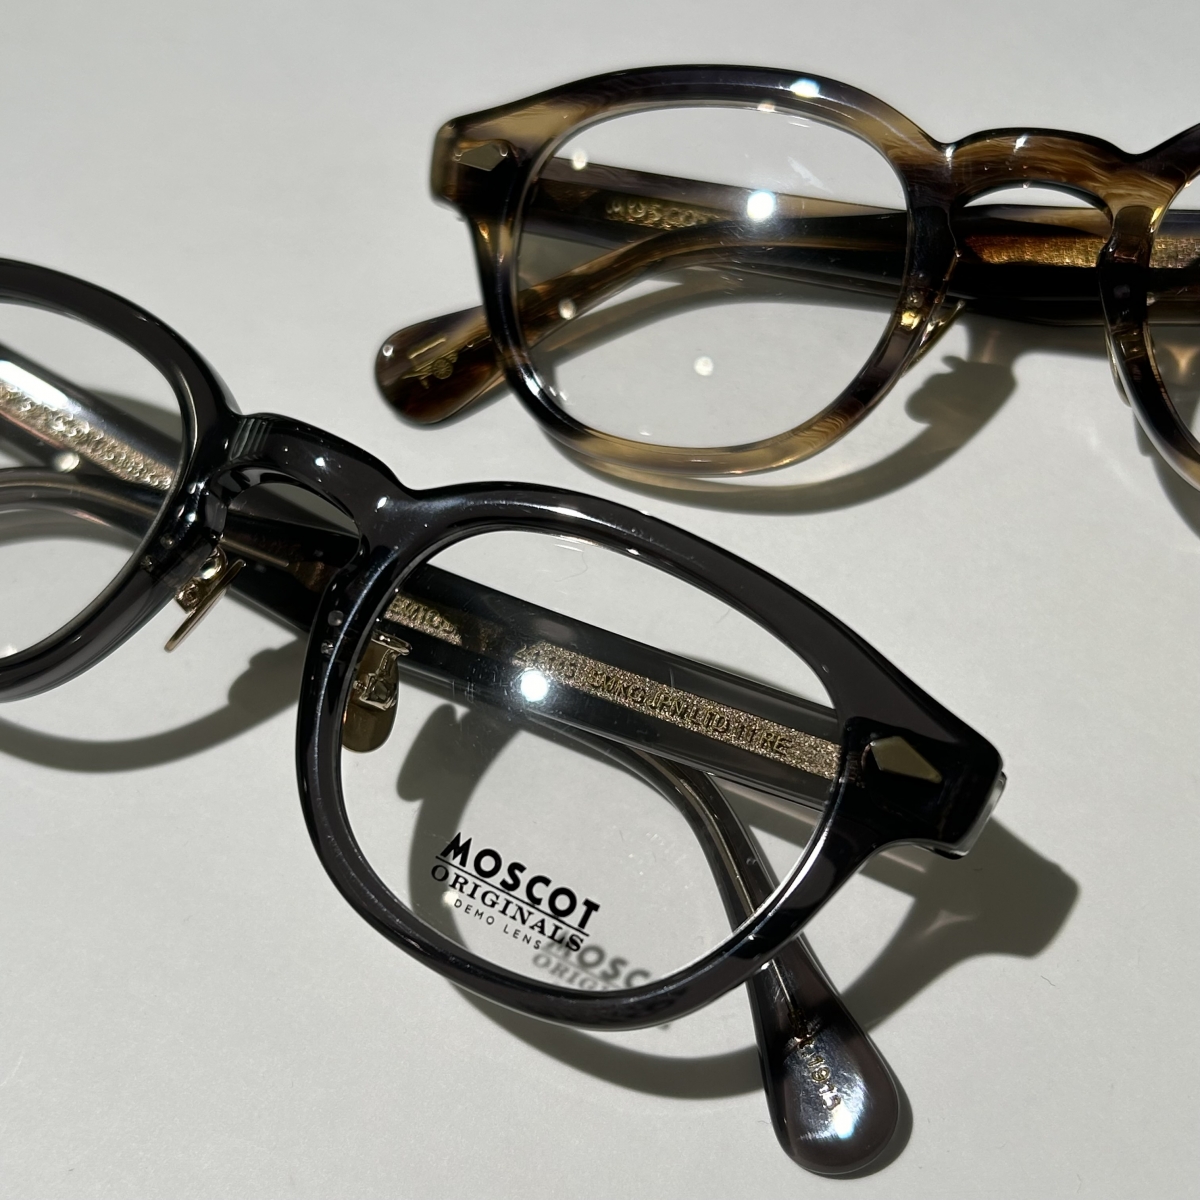 MOSCOT JAPAN LIMITED入荷！